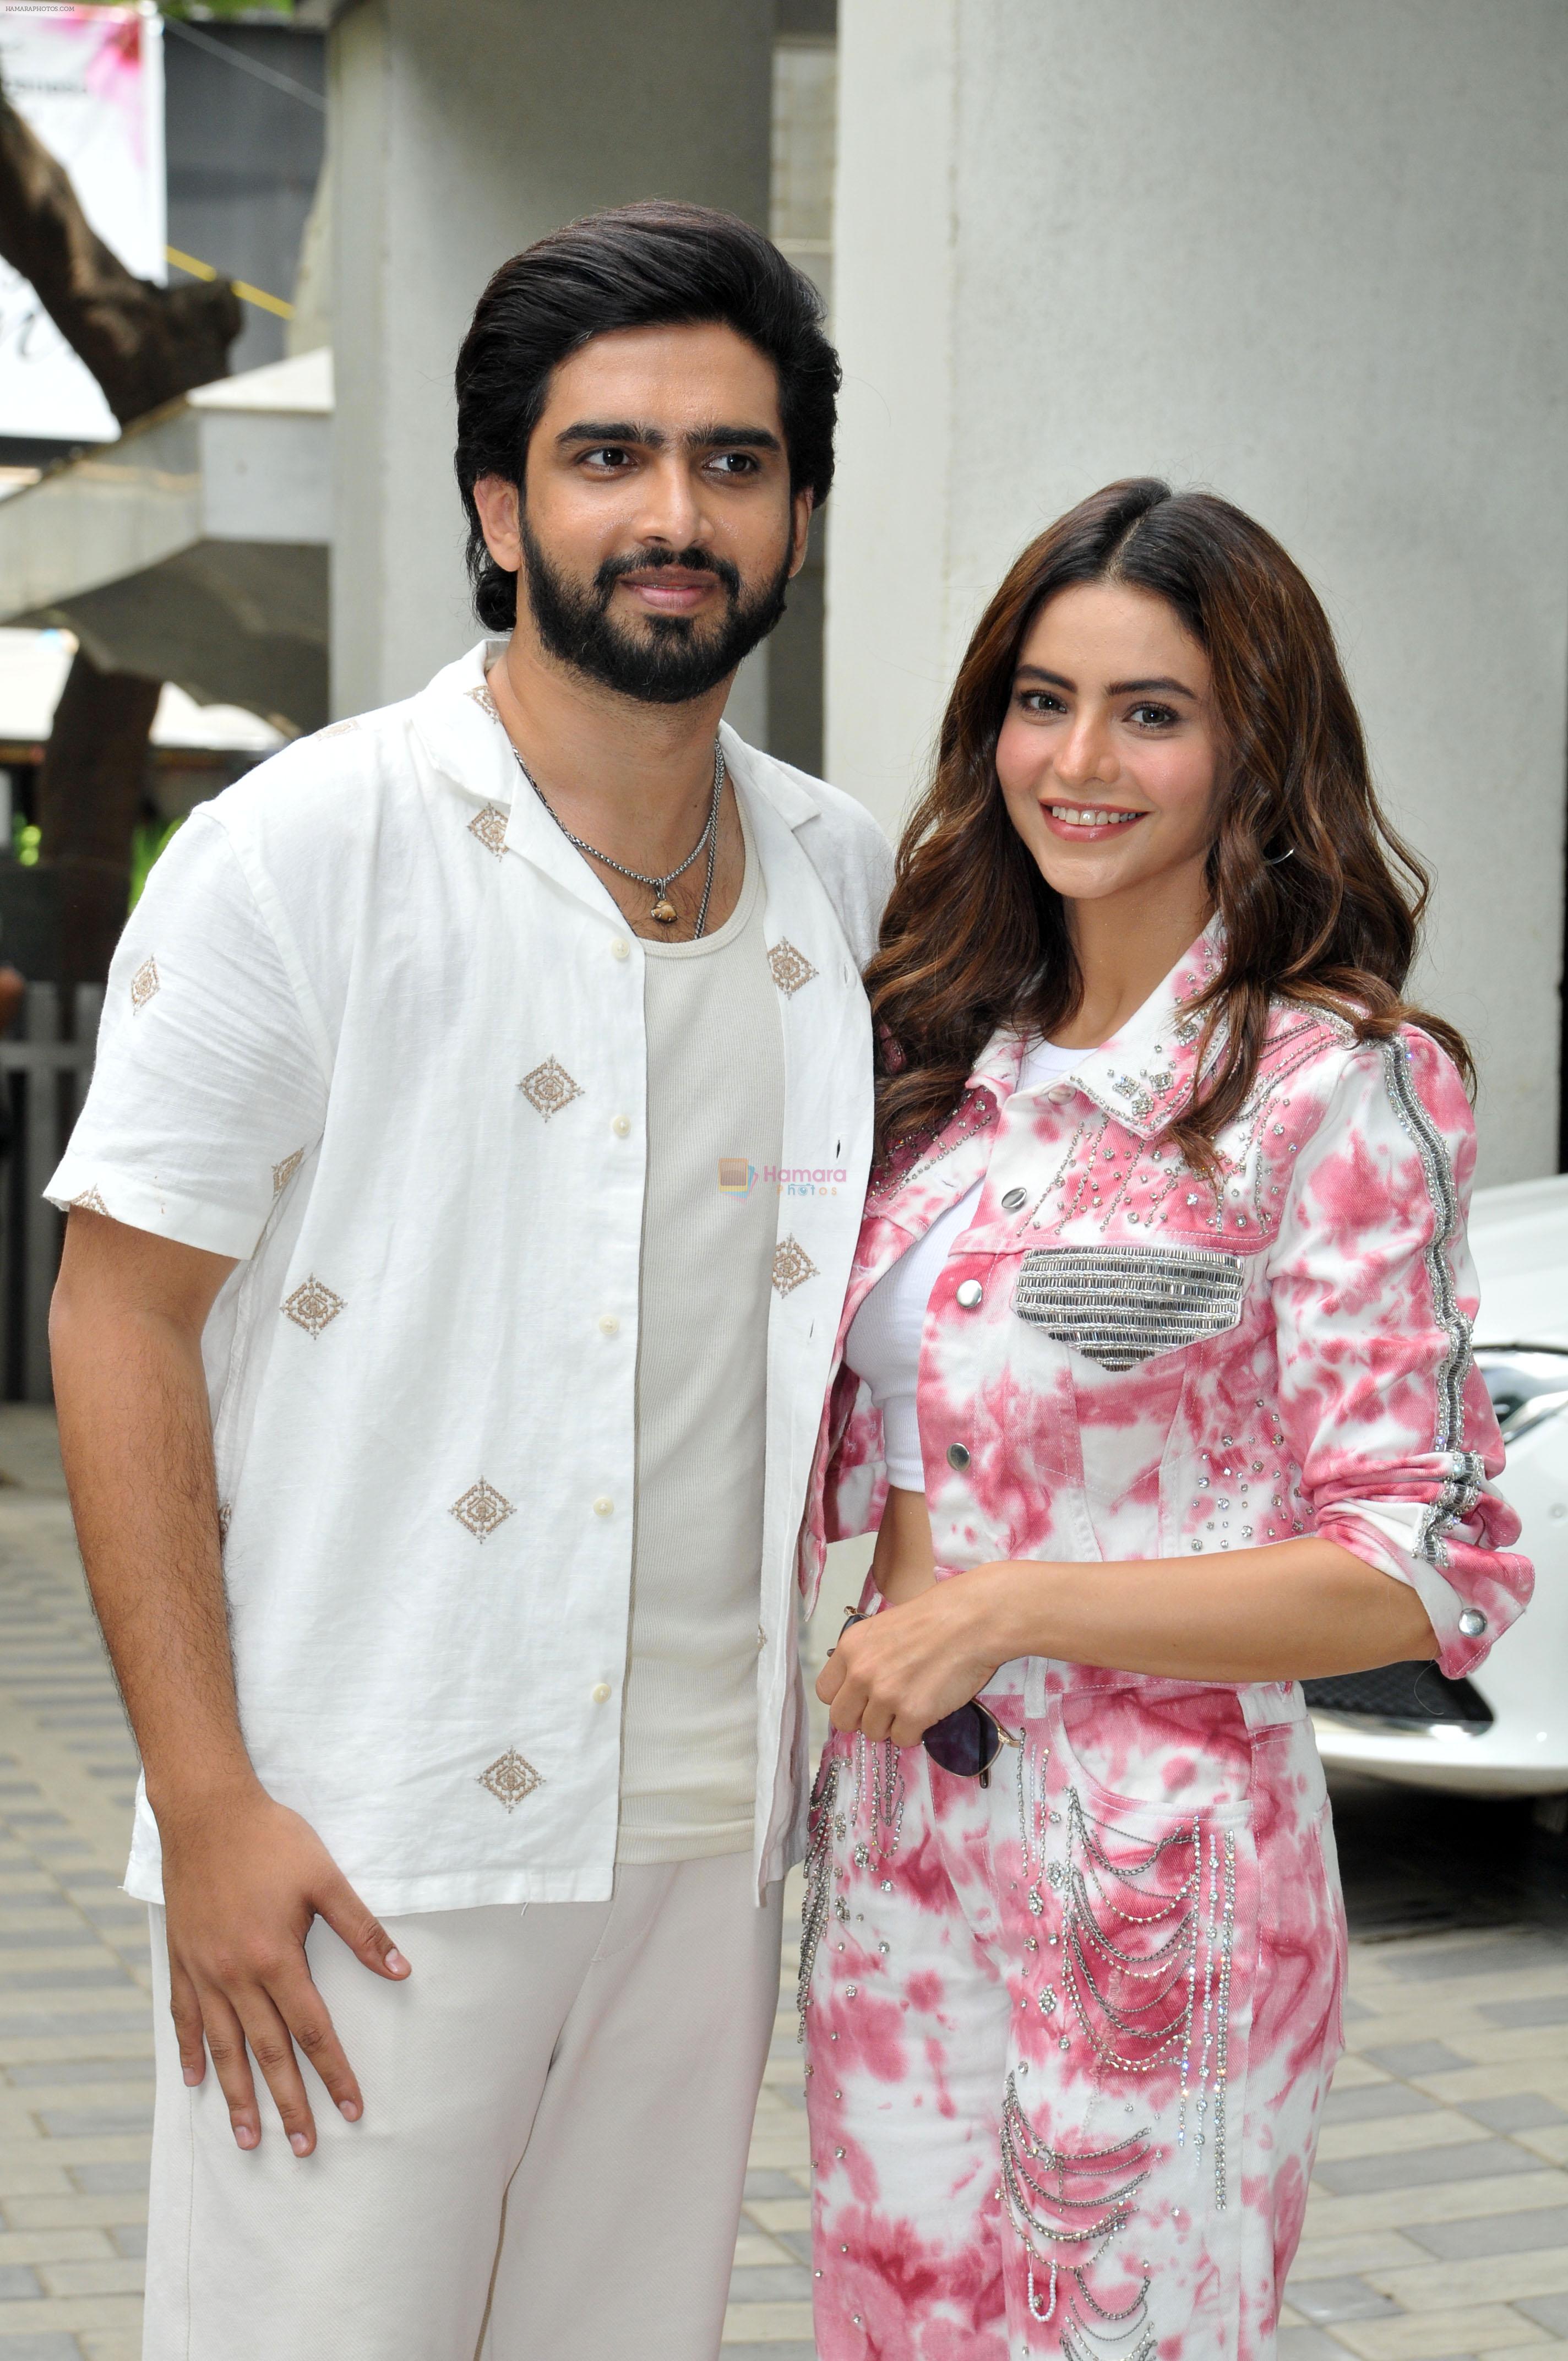 Amaal Mallik and Aamna Sharif pose for the camera at the T-Series office on 19 Jun 2023